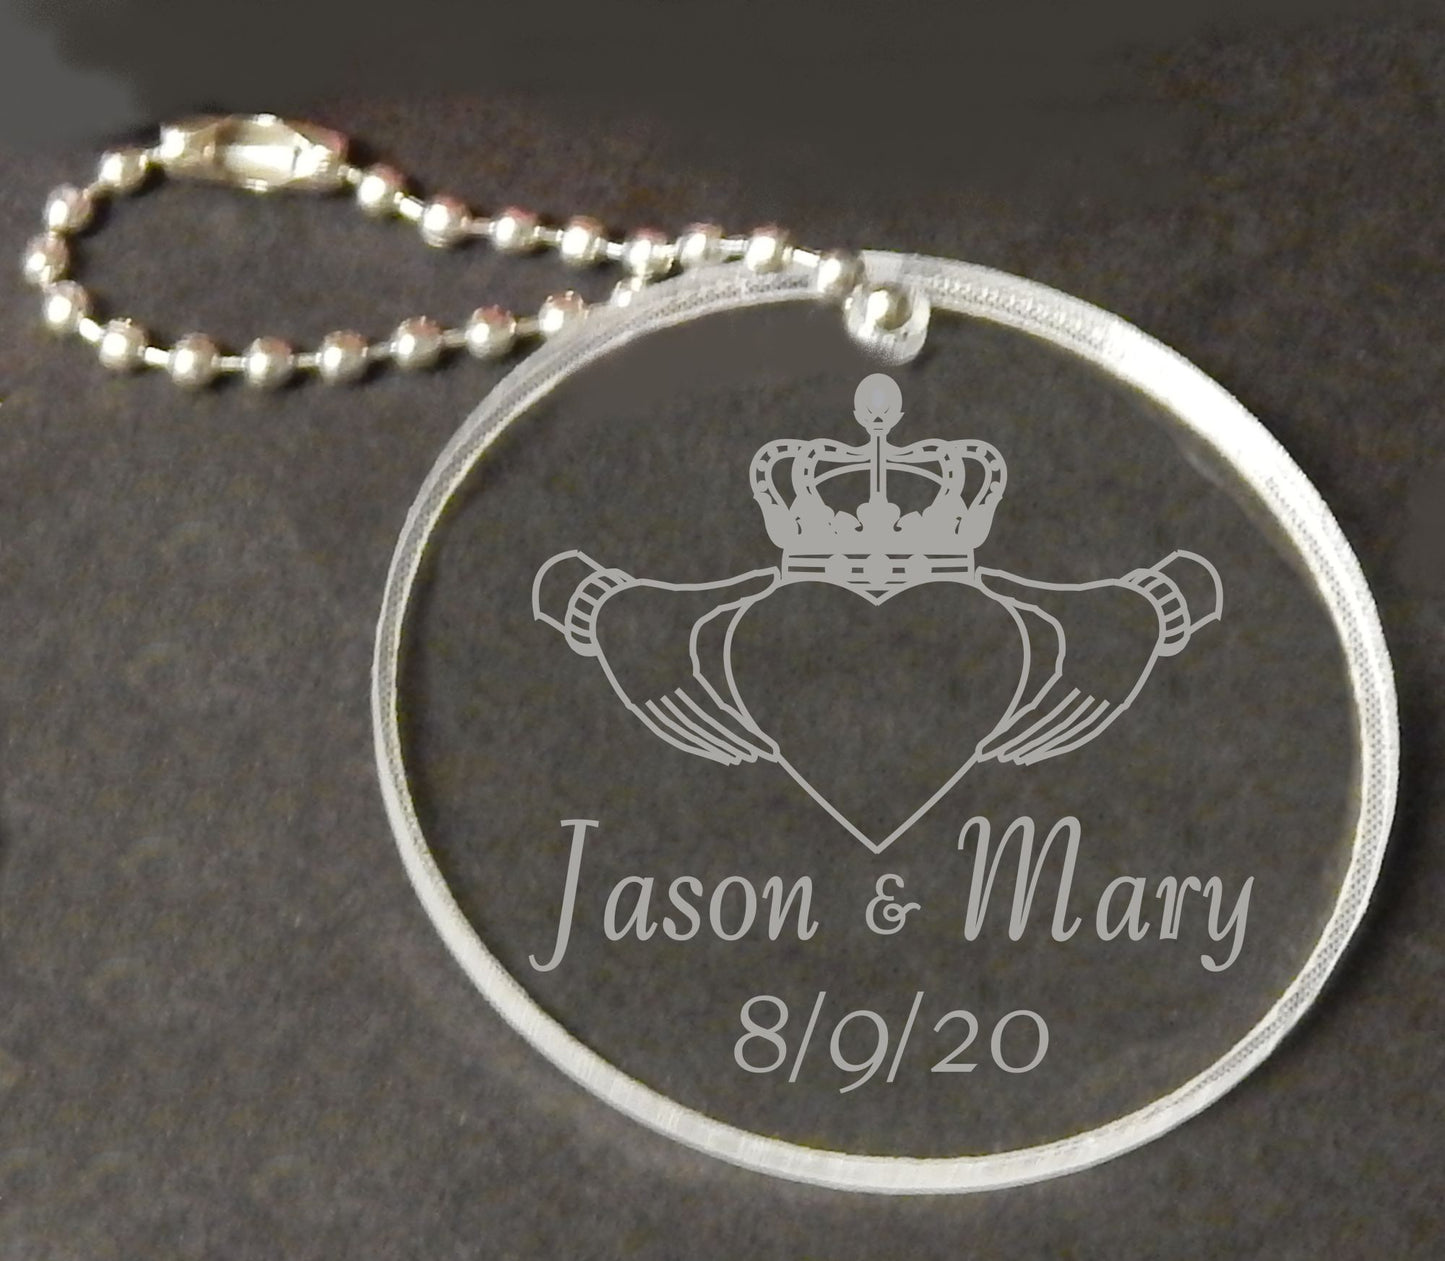 round acrylic keychain designed with a claddagh symbol and names and date, attached to a small metal chain